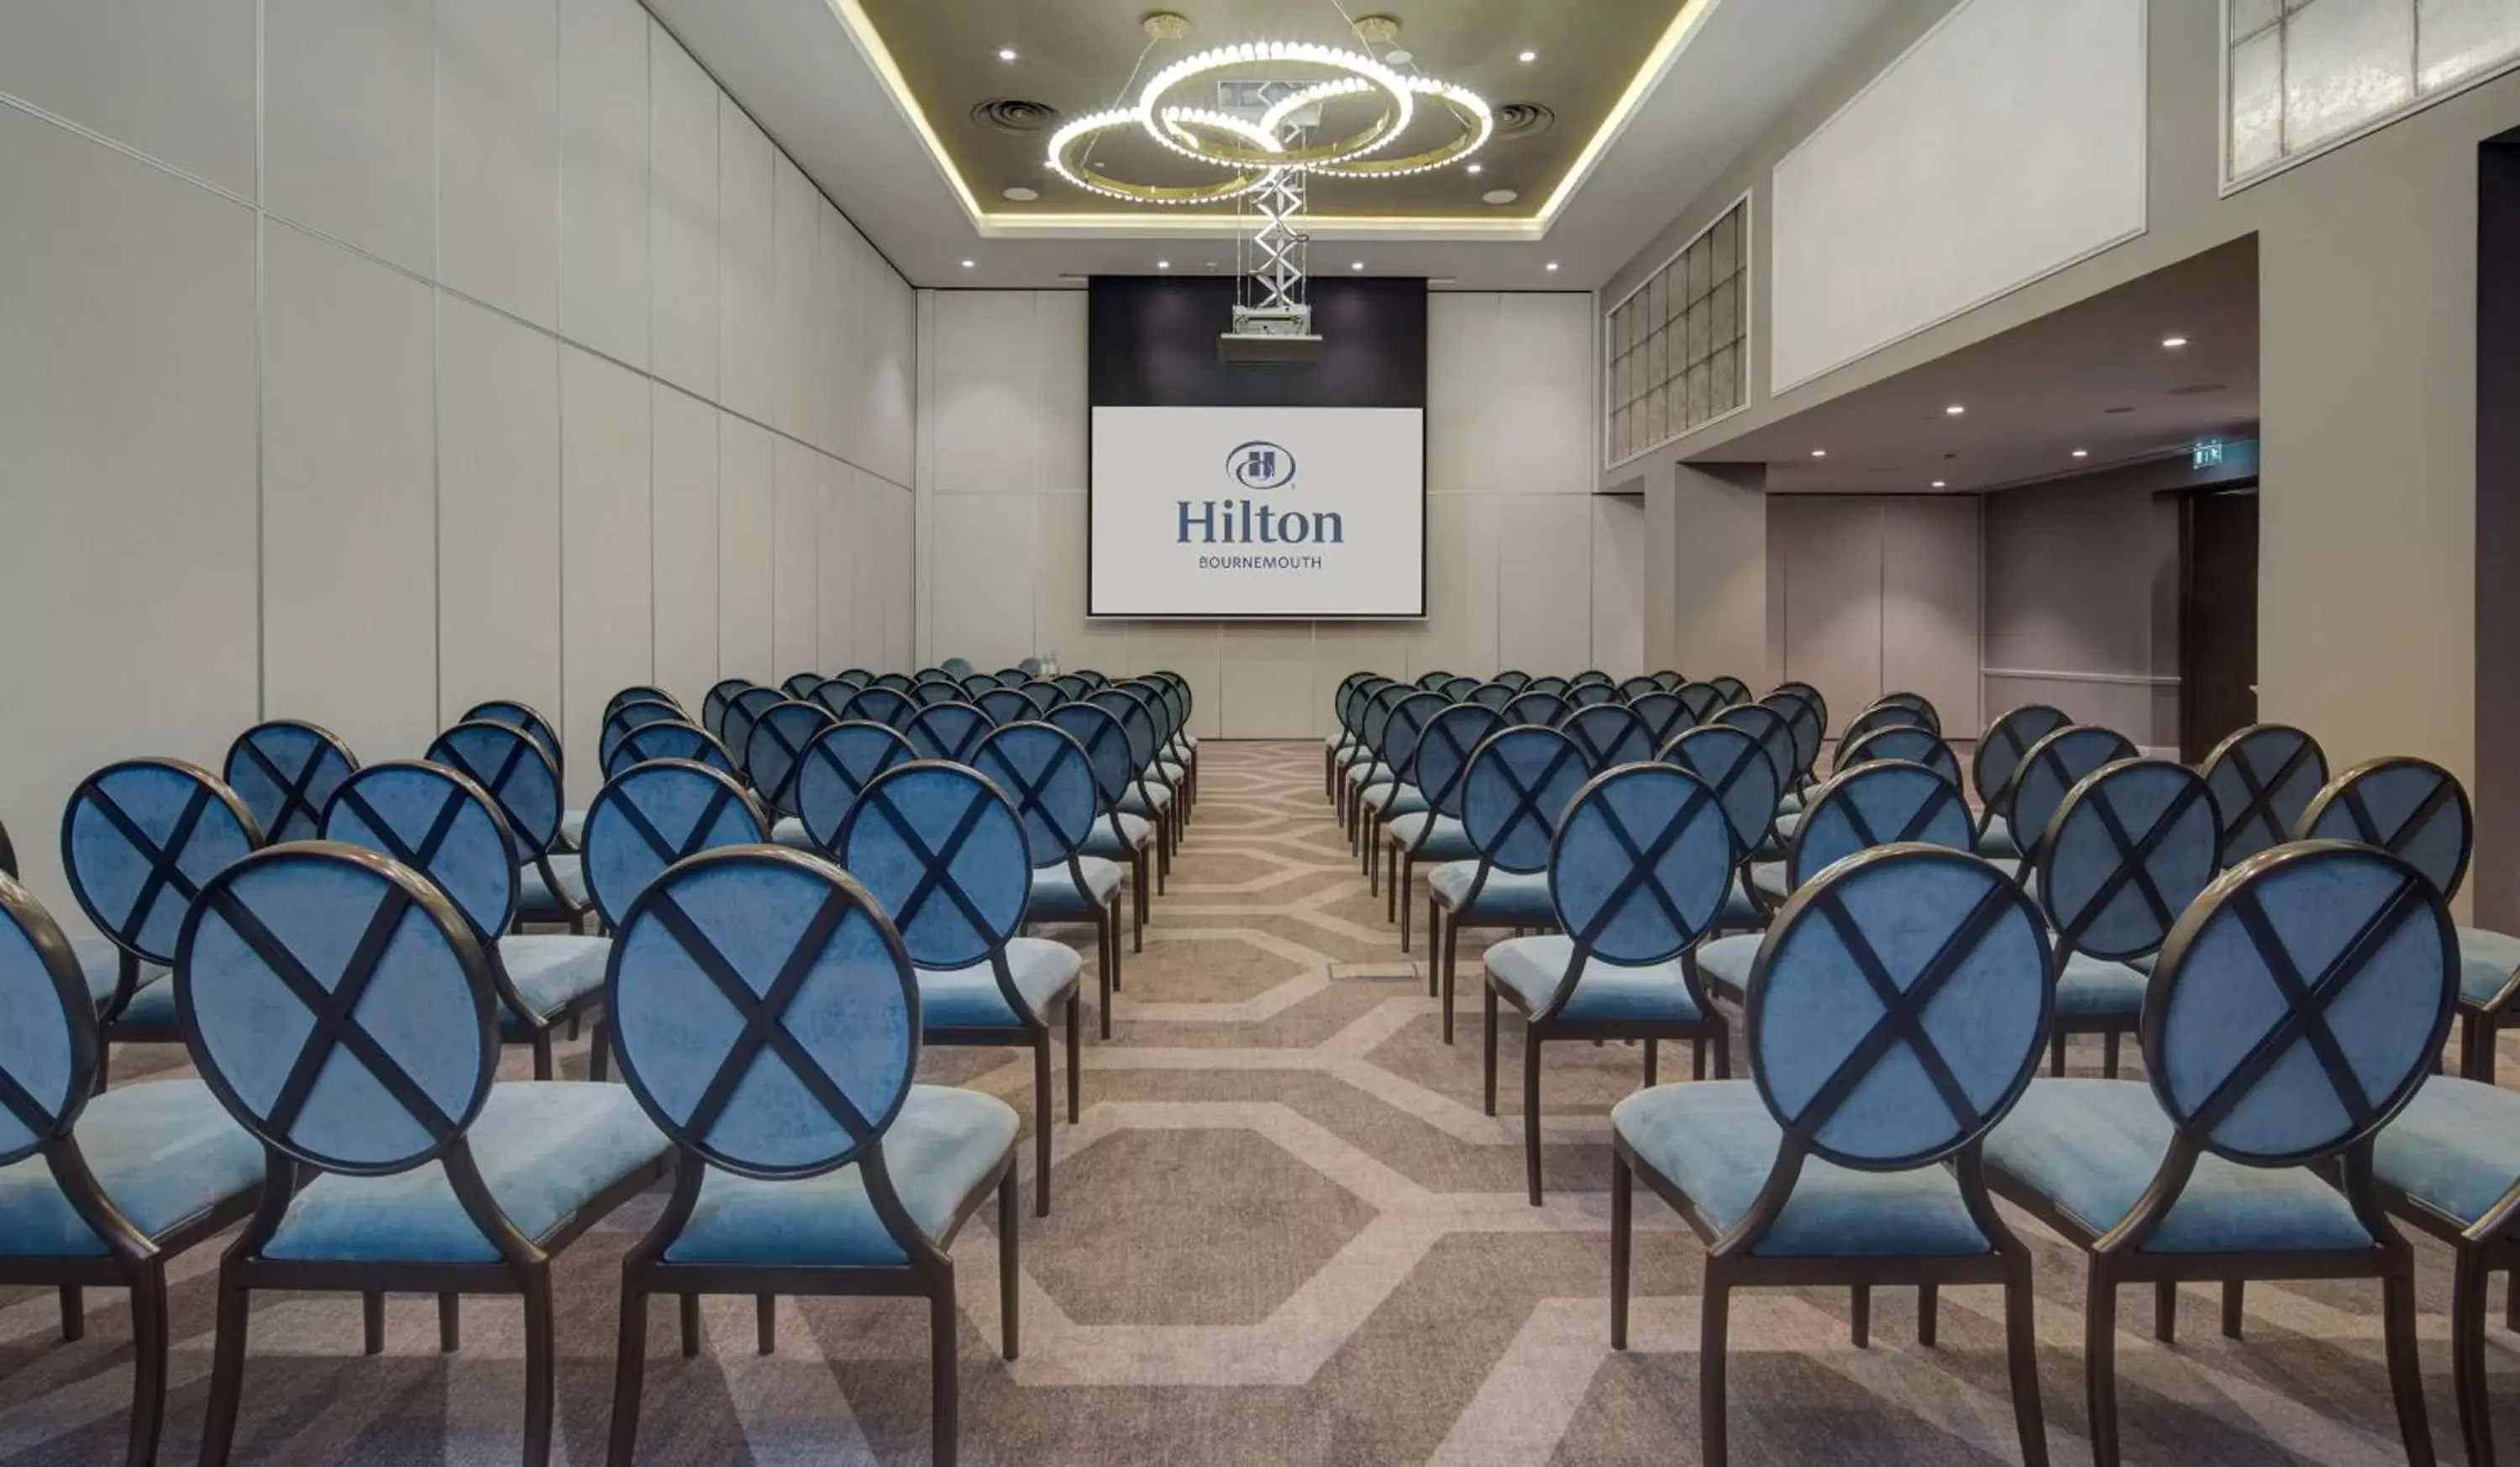 Meeting/conference room in Hilton Bournemouth